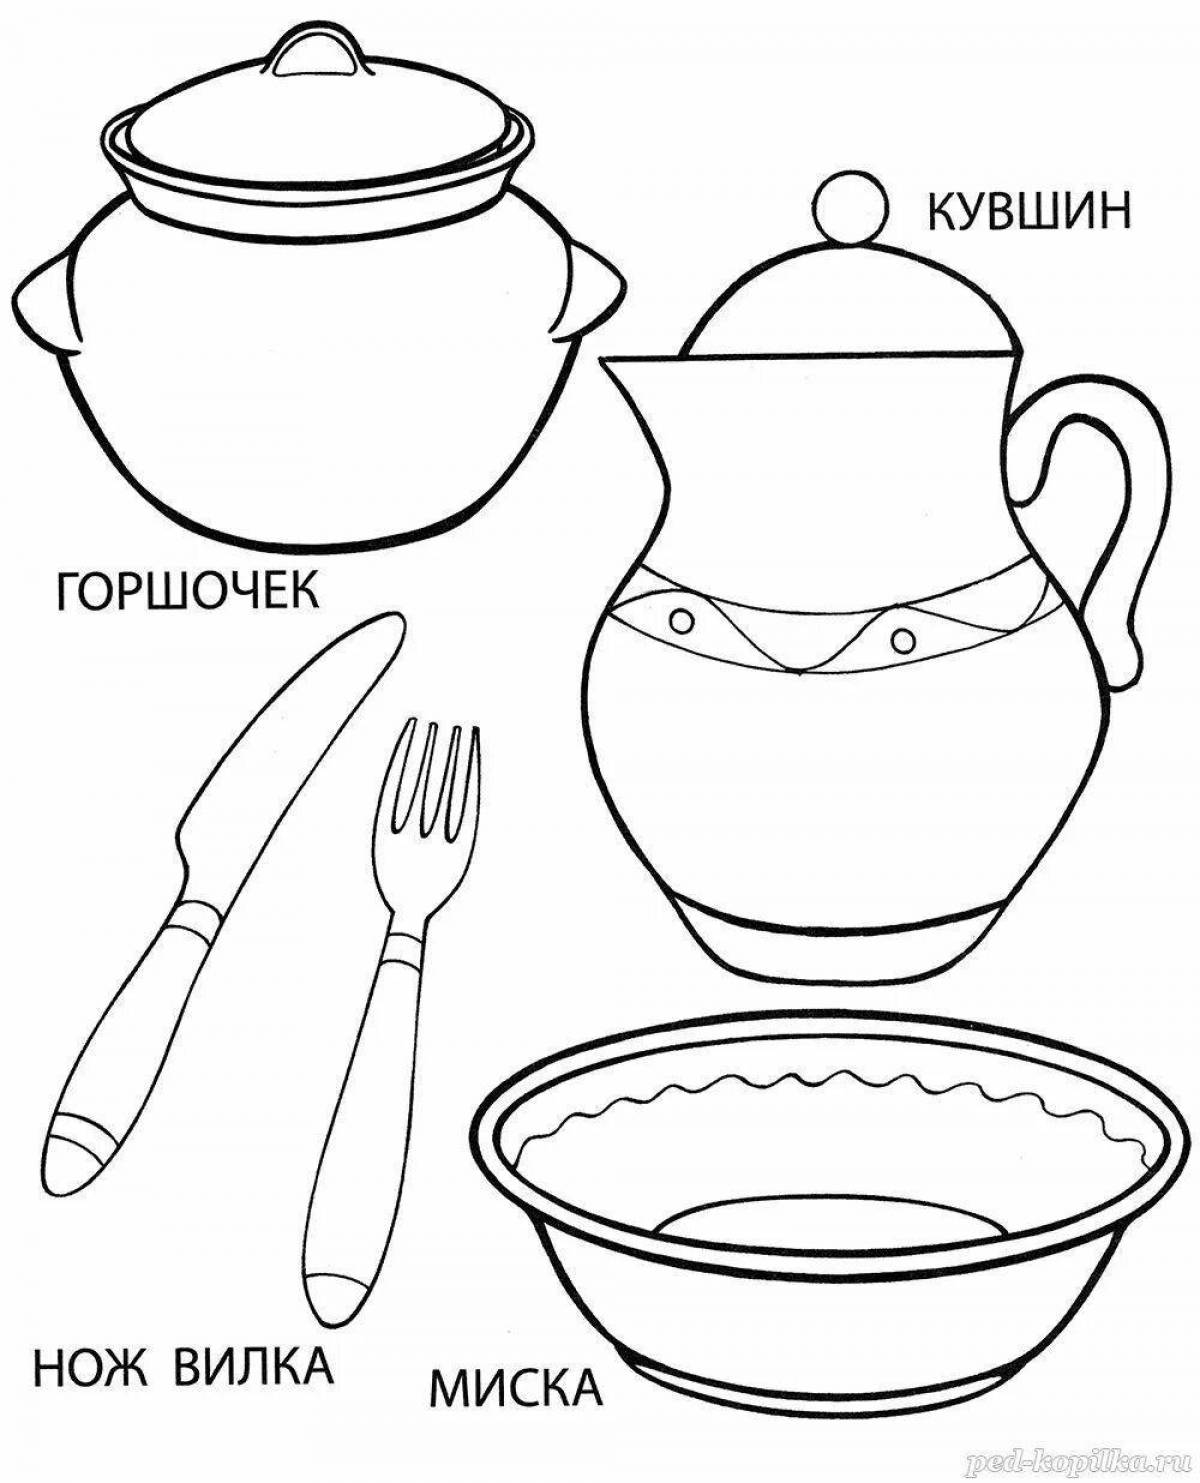 Traditional tableware coloring page